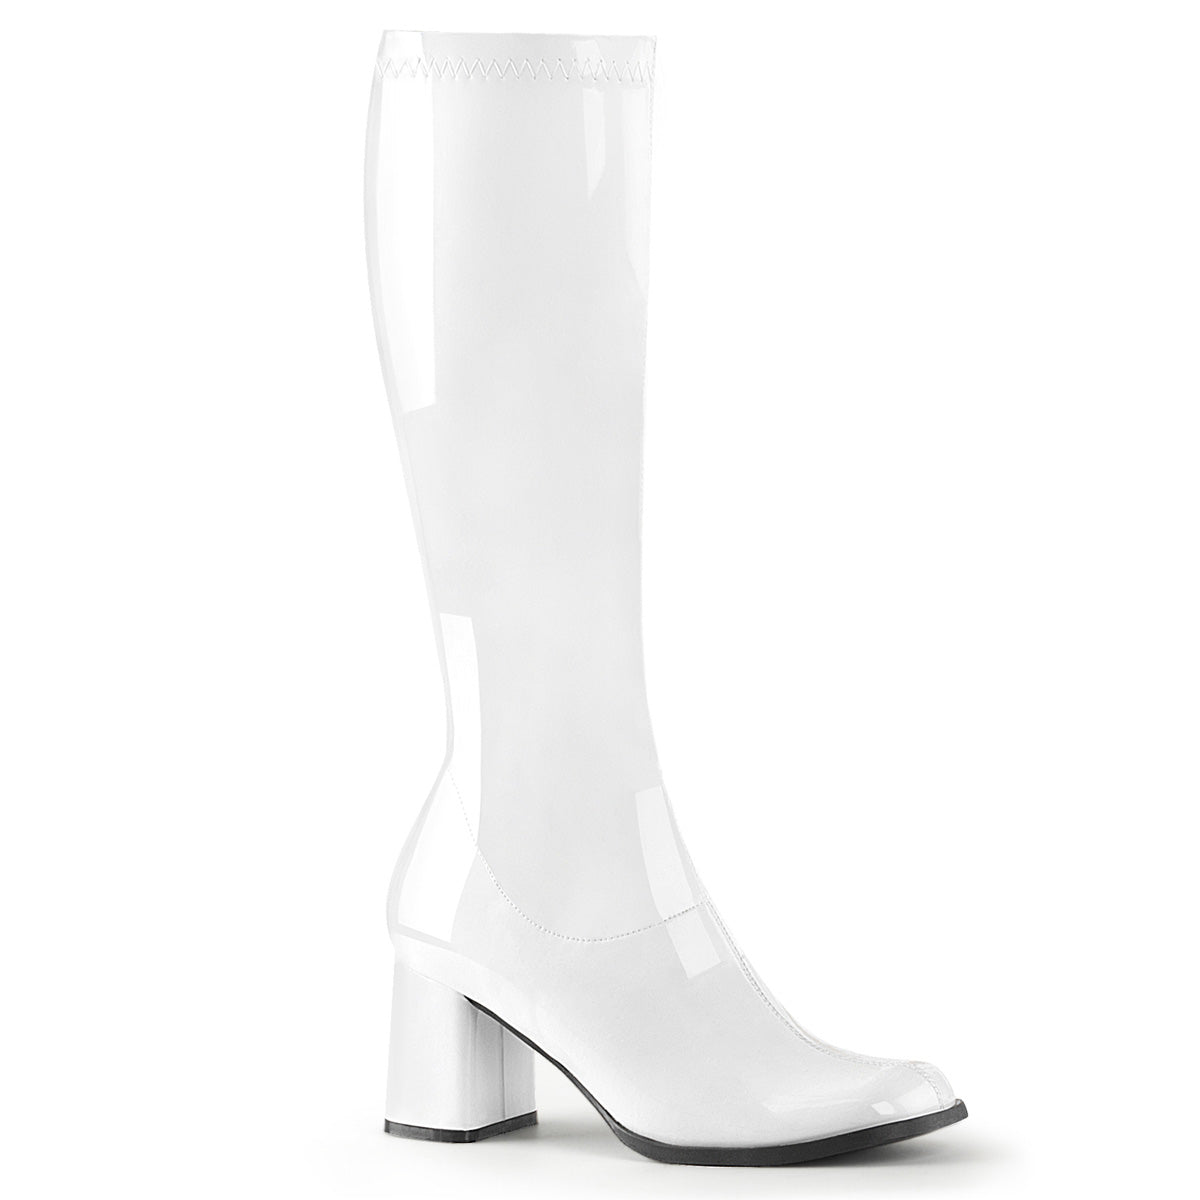 Clearance Funtasma Gogo 300 White Patent Size 3UK/6USA - From Clearance Sold By Alternative Footwear